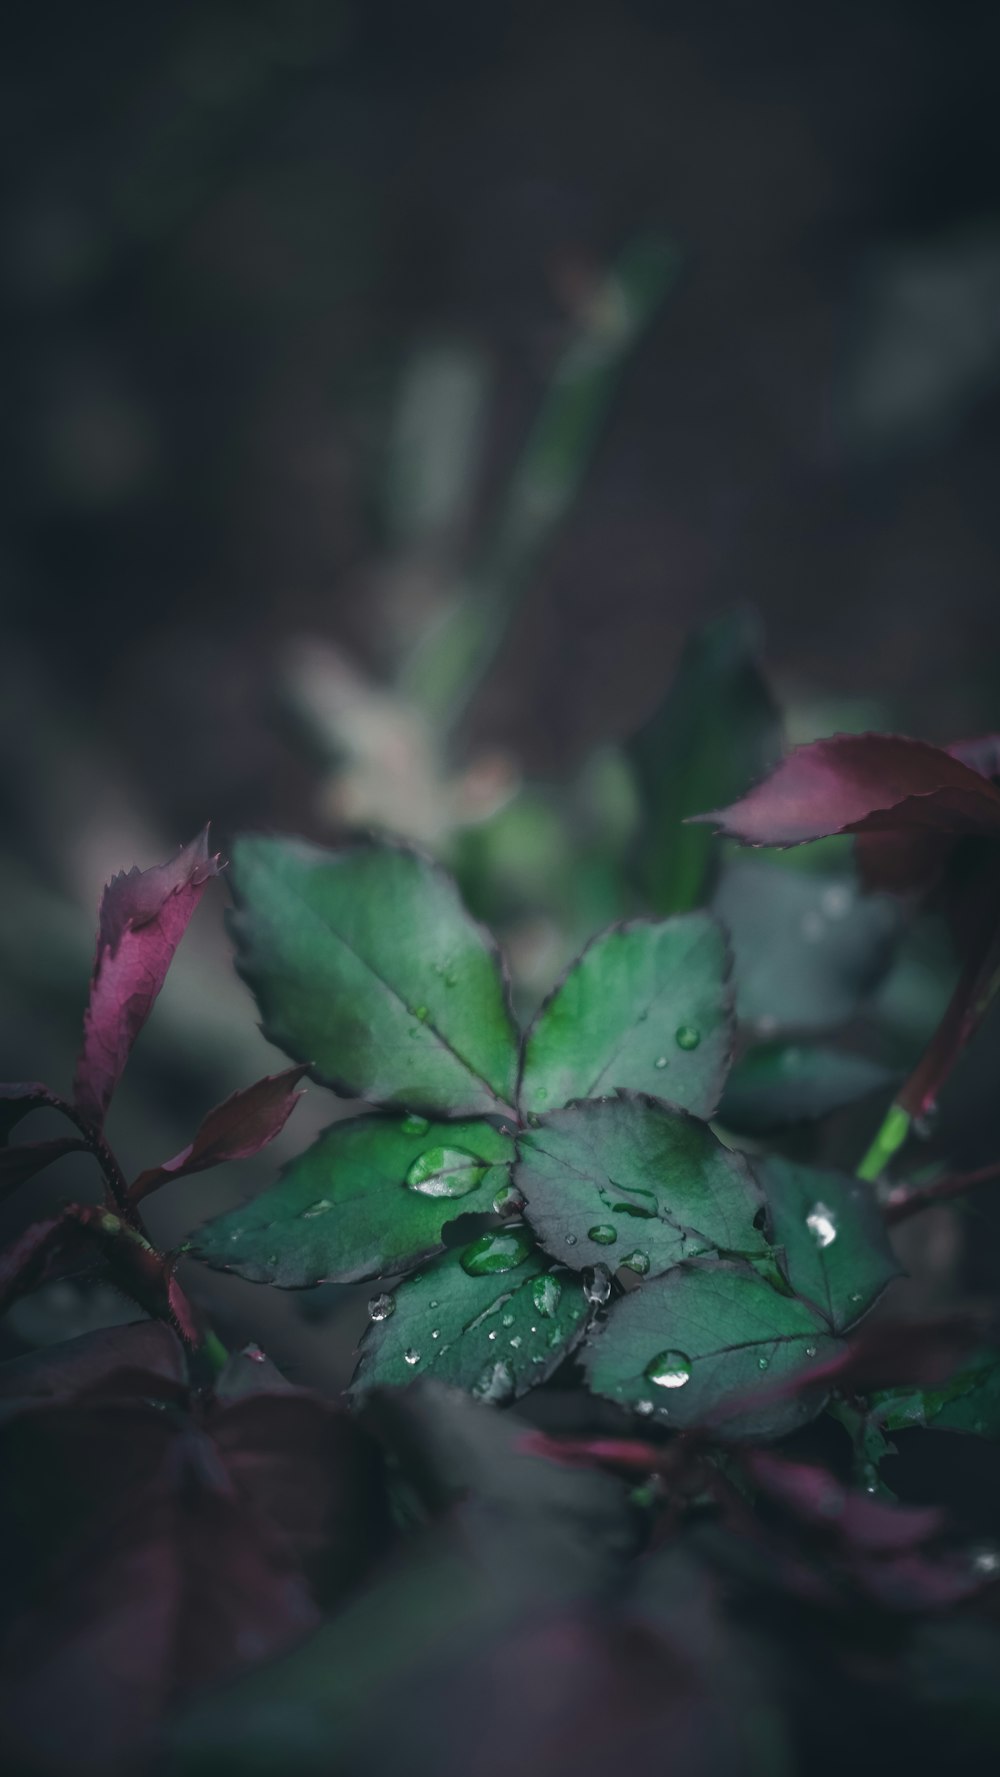 water drops on green leaf plant